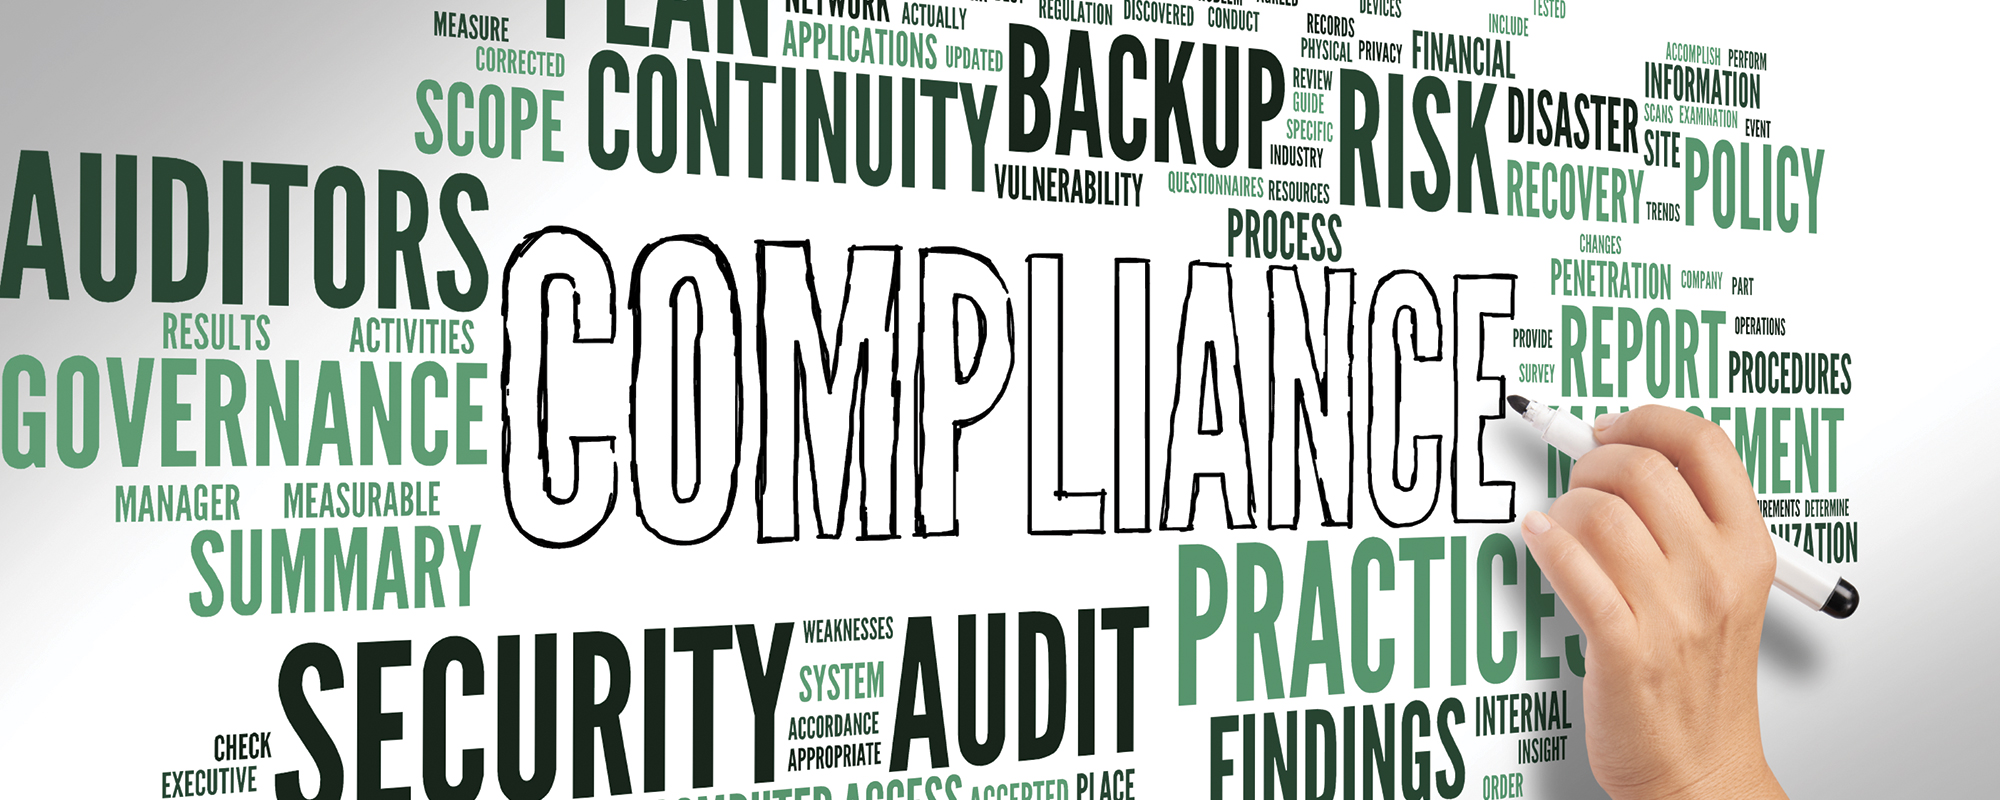 COMPLIANCE CORNER: Going Beyond The Rules